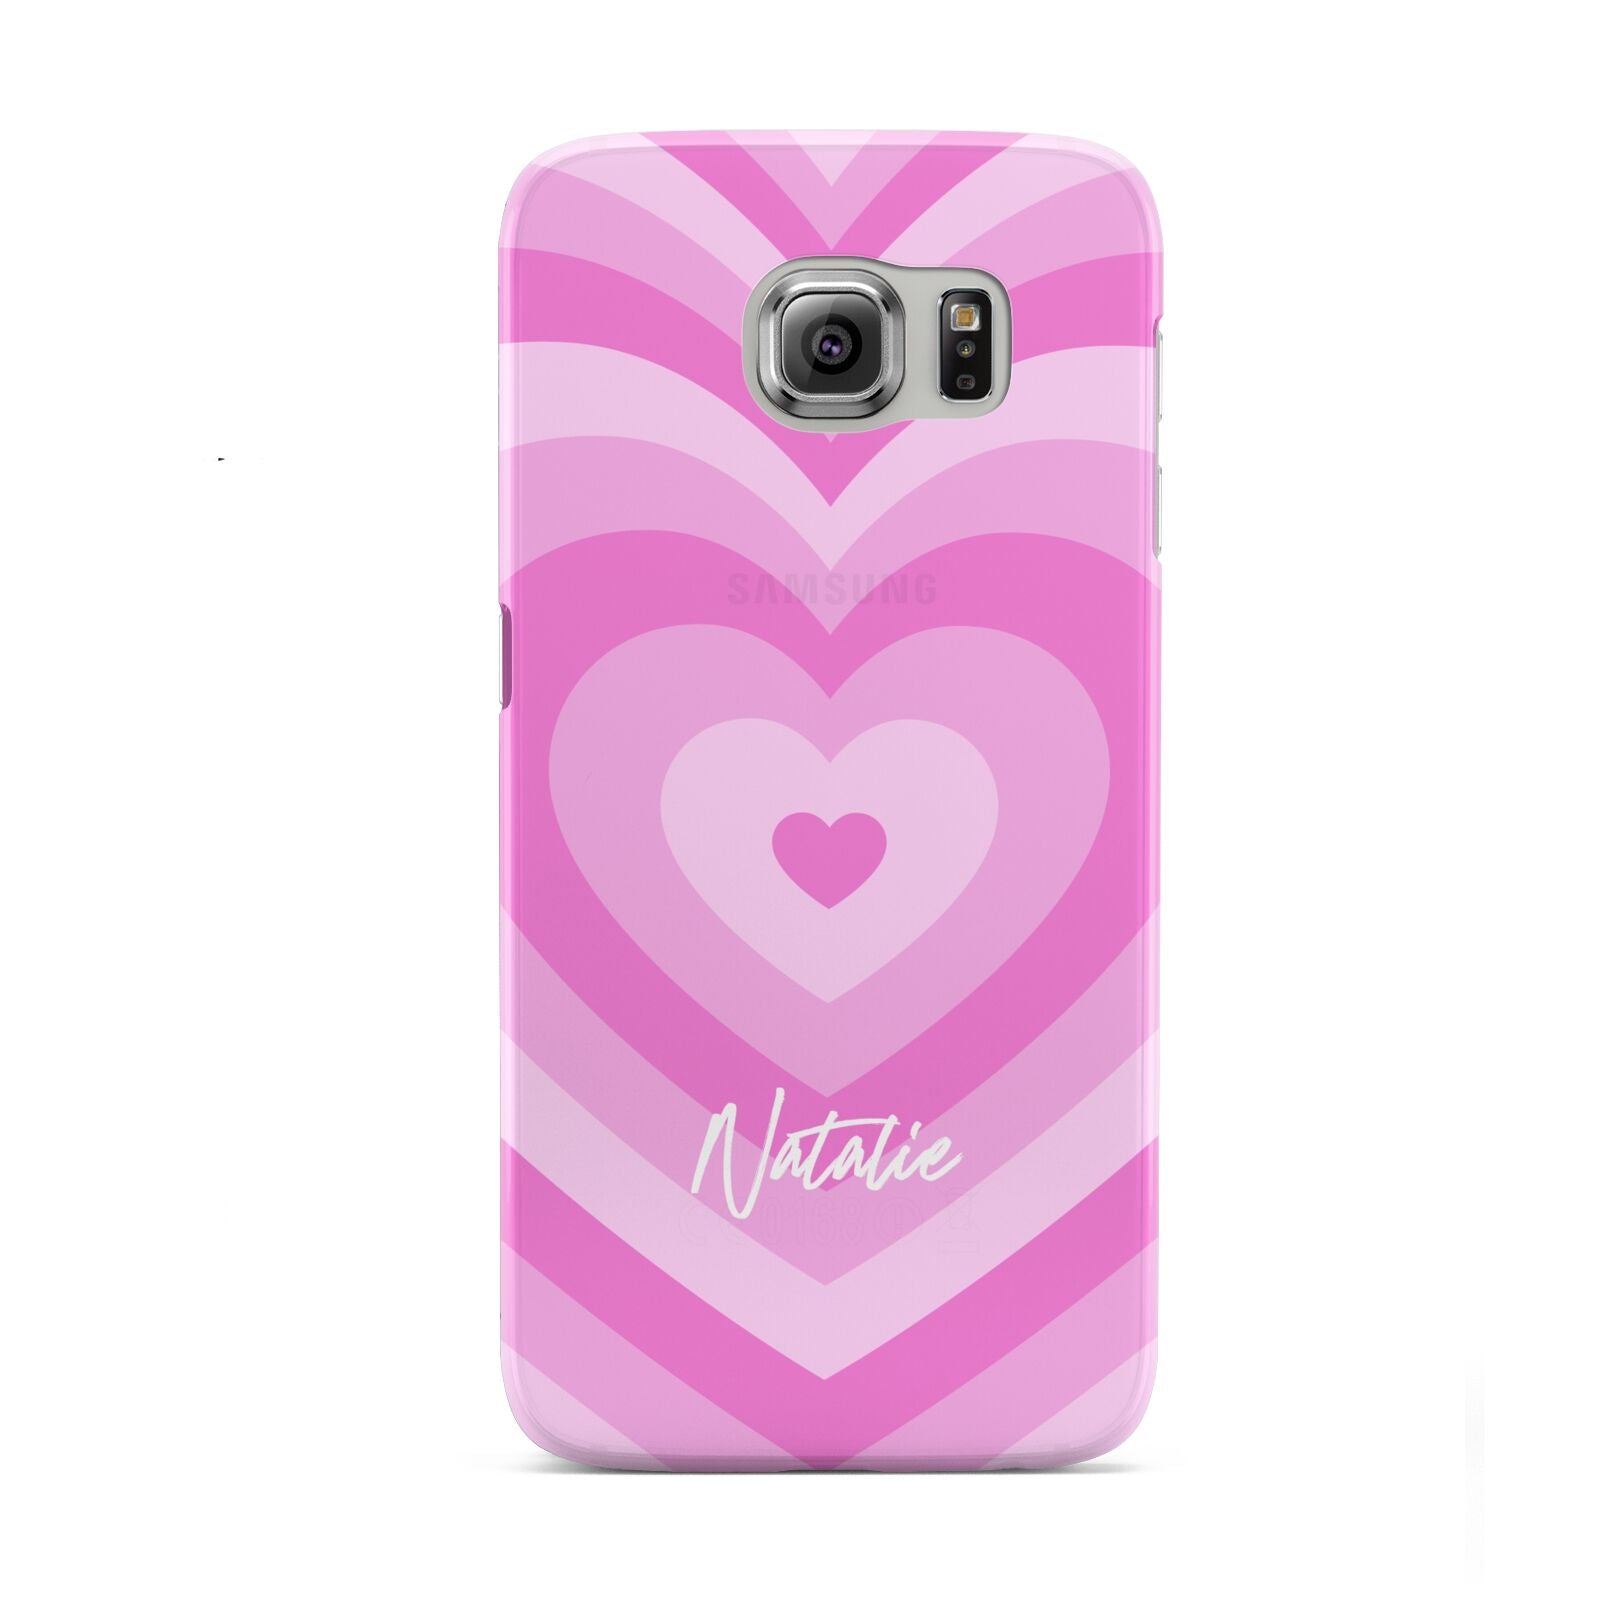 Personalised Pink Heart Samsung Galaxy S6 Case